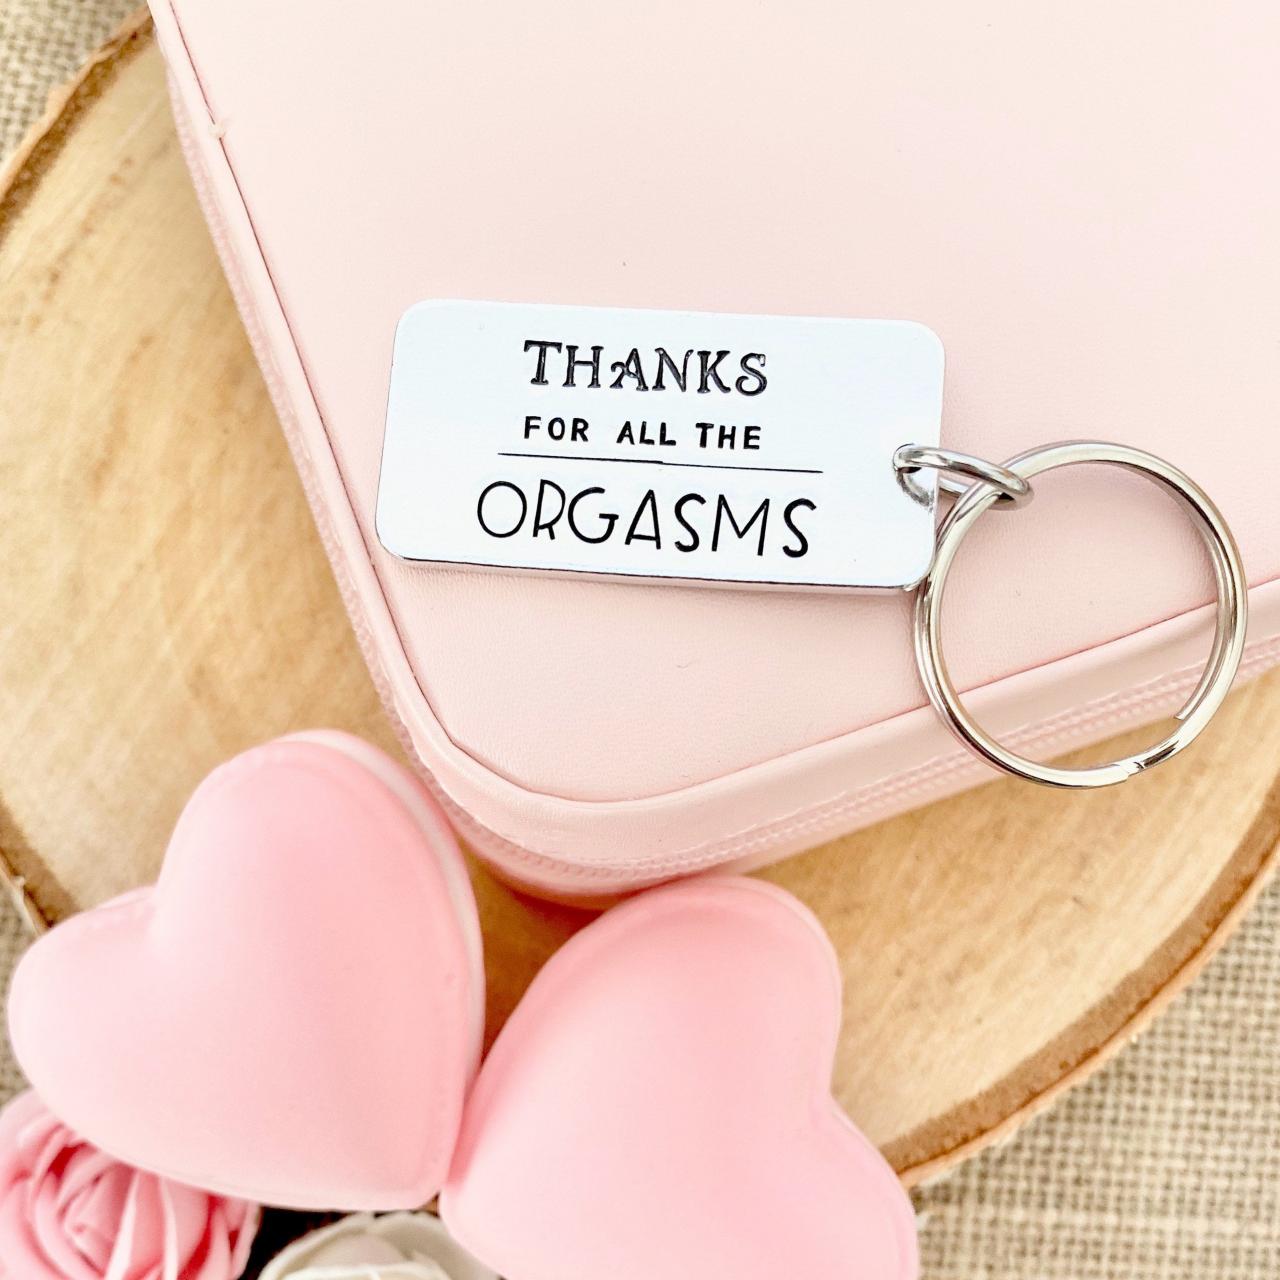 Thanks For All The Orgasms, Valentine's Day Gift, Anniversary Gift, Funny, Gift For Men Husband Boyfriend, Girlfriend Wife Gift,